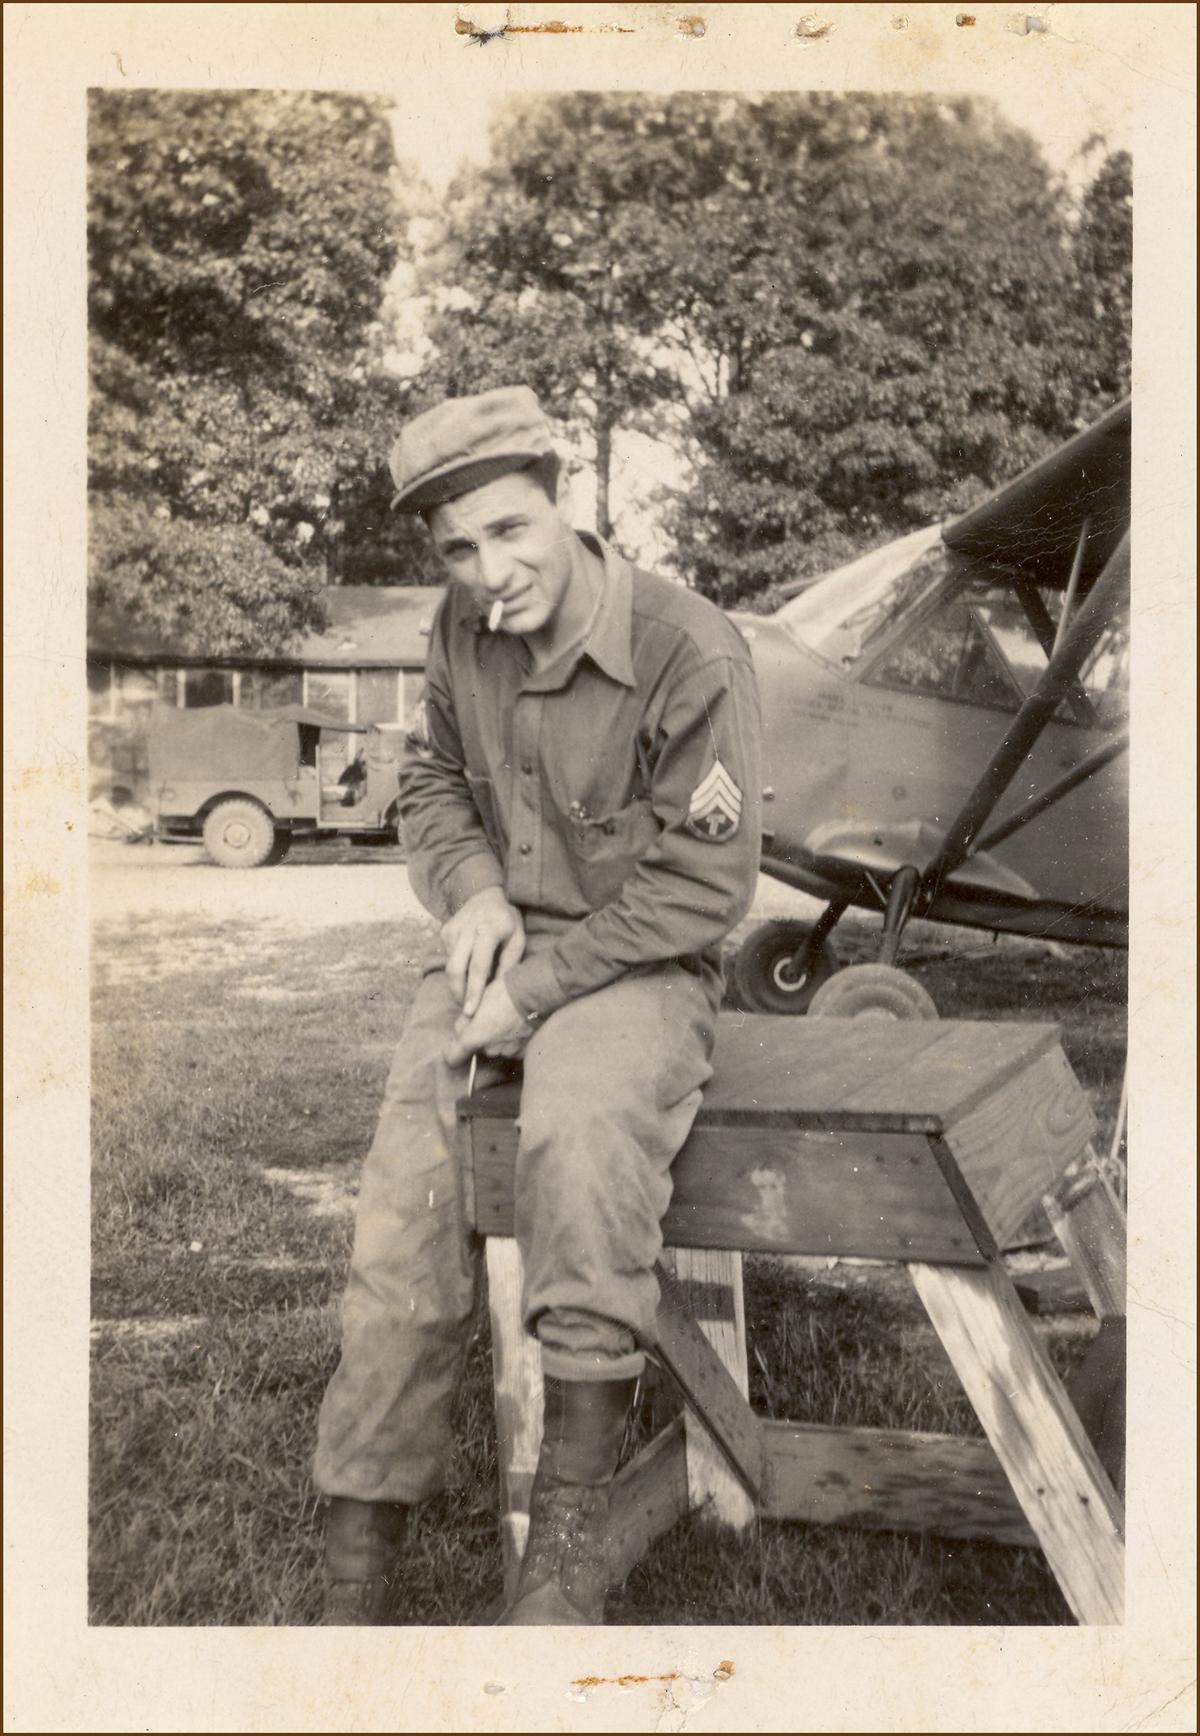 Master Sgt. Critelli while in Germany, near the end of the war. (Courtesy of Dominick Critelli)